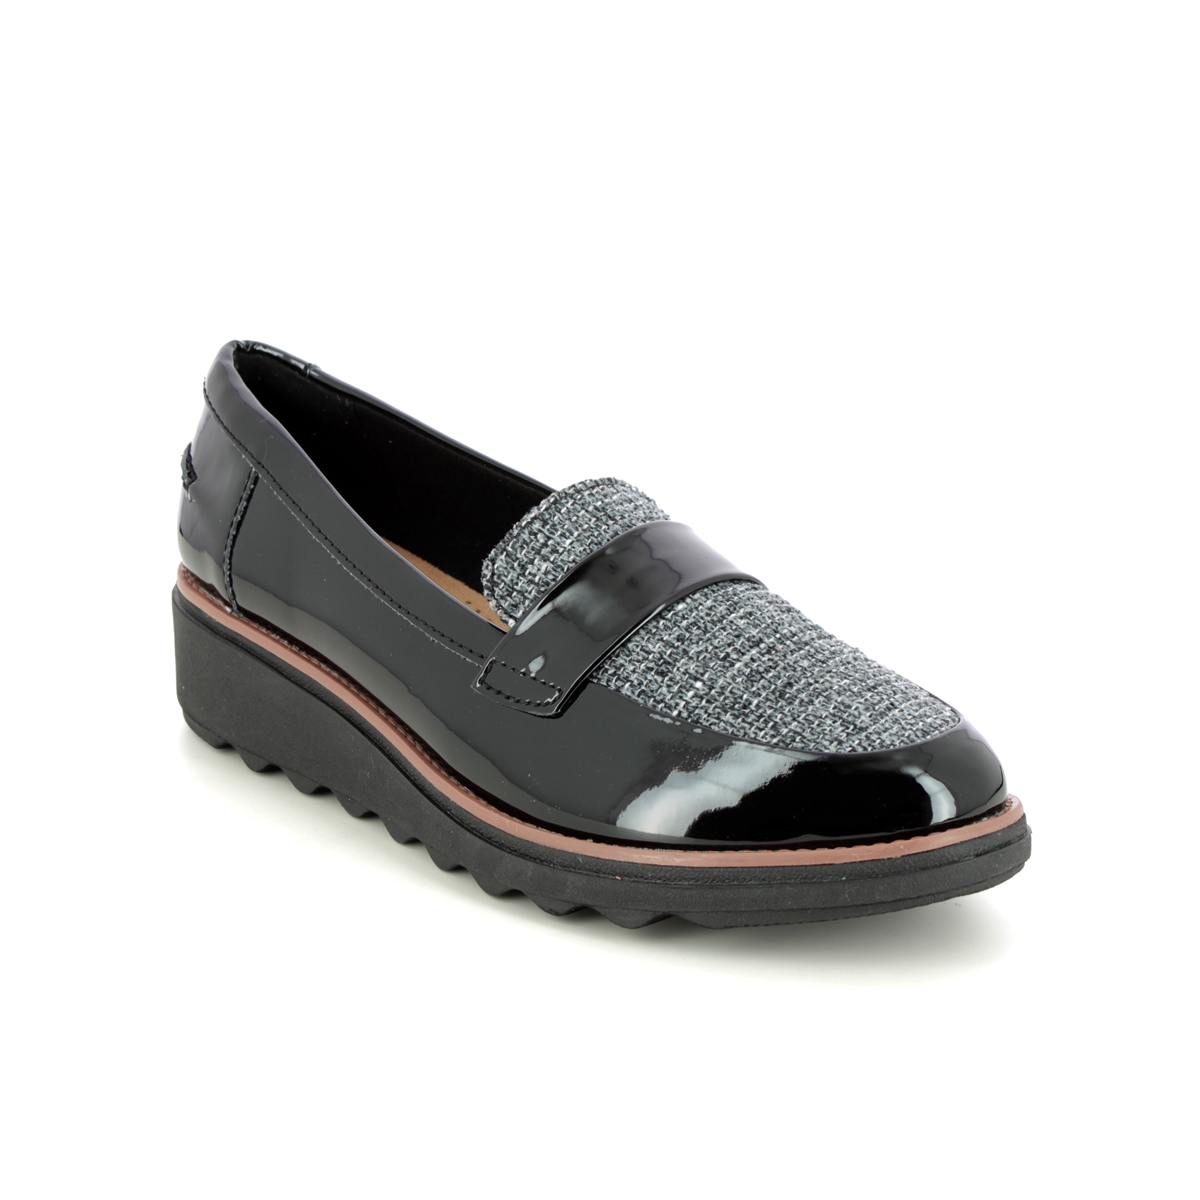 Clarks Sharon Gracie Black Patent Womens Loafers 640824D In Size 3 In Plain Black Patent